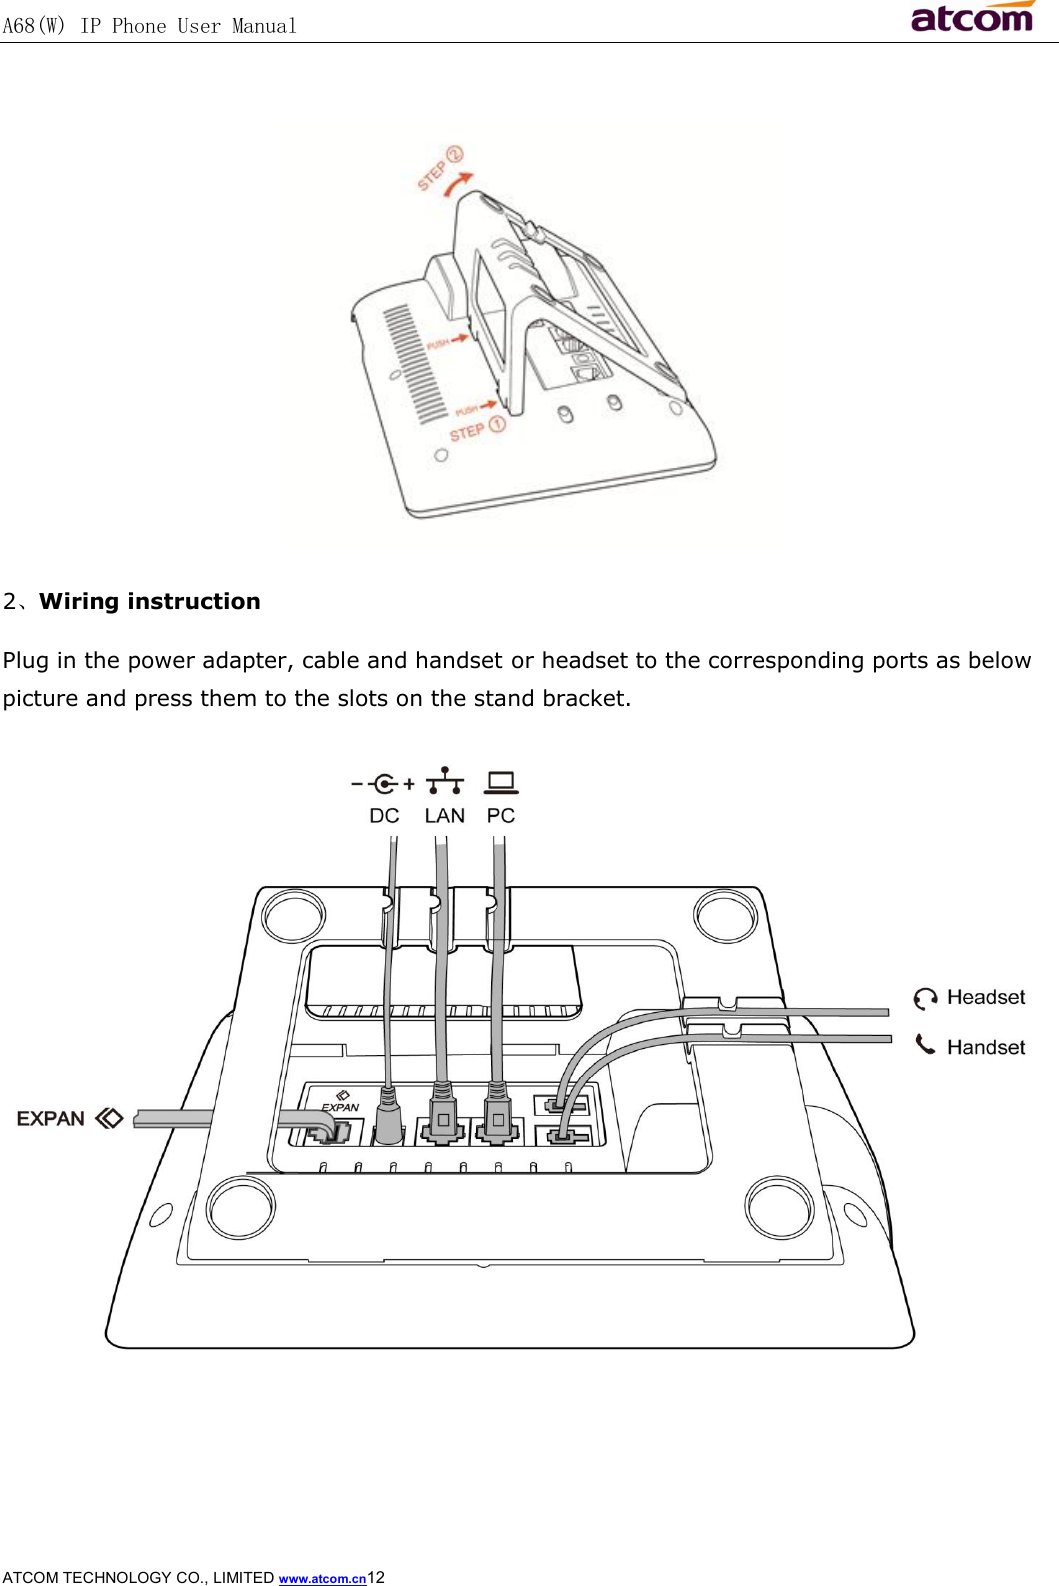 A68(W) IP Phone User Manual                                                           ATCOM TECHNOLOGY CO., LIMITED www.atcom.cn12    2、Wiring instruction Plug in the power adapter, cable and handset or headset to the corresponding ports as below picture and press them to the slots on the stand bracket.   